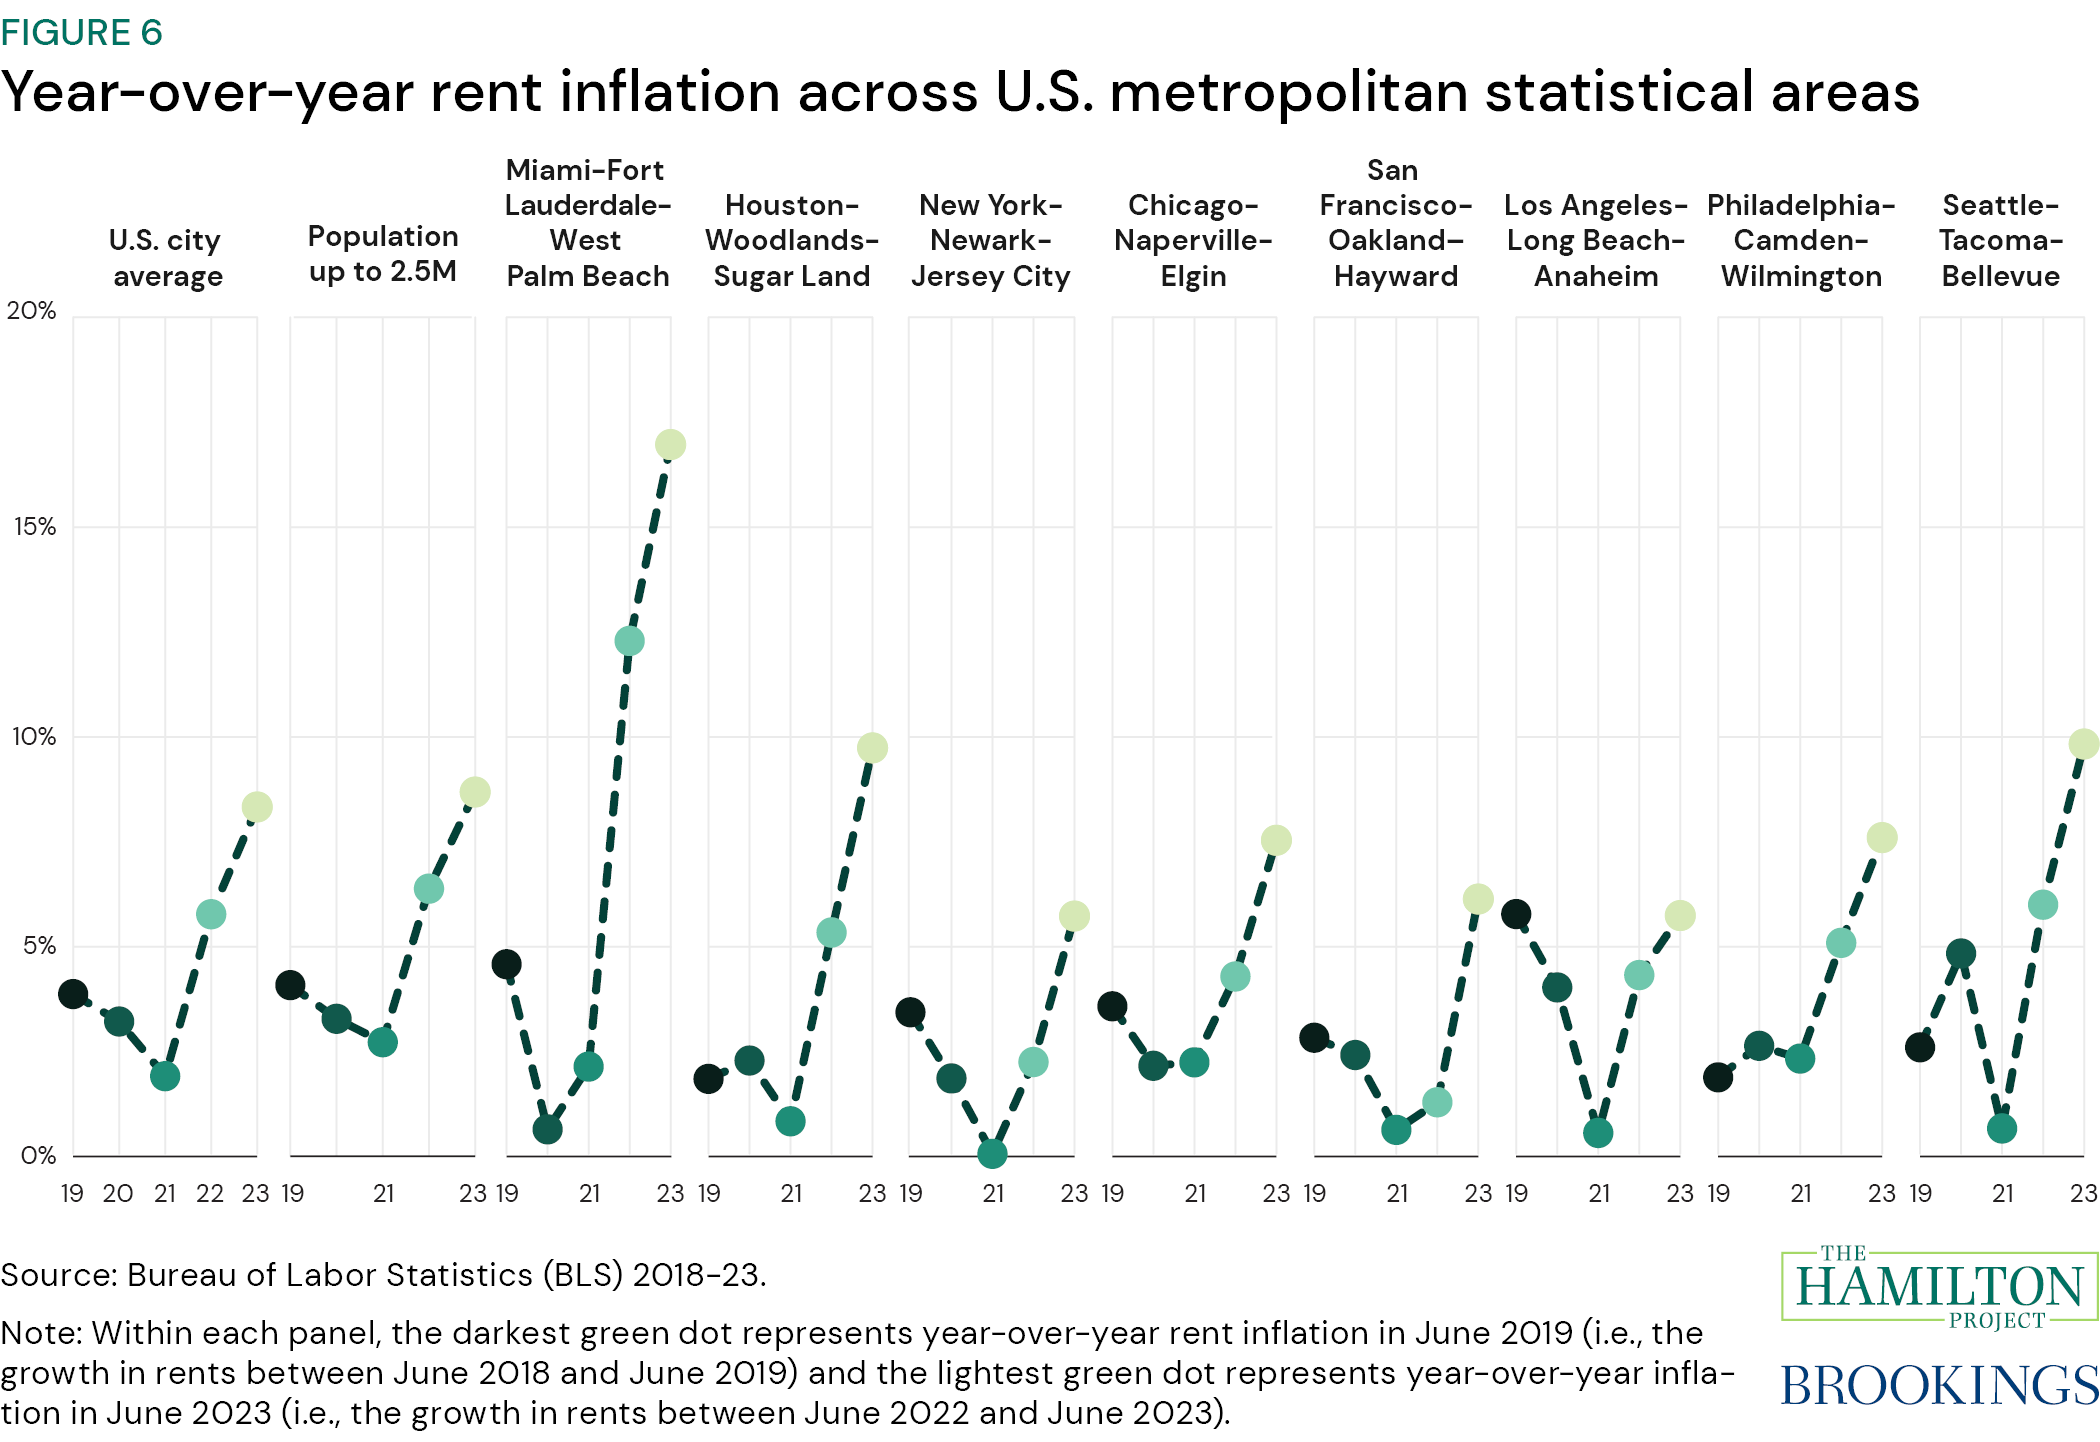 Figure 6: Year-over-year rent inflation across U.S. metropolitan statistical areas. This figure compares rent inflation by the following: U.S. city average; population up to 2.5M; Miami, Fort Lauderdale, West Palm Beach; Houston, Woodlands, Sugar Land; New York, Newark, Jersey City; Chicago, Naperville, Elgin; San Francisco, Oakland, Hayward; Los Angeles, Long Beach, Anaheim; Philadelphia, Camden, Wilmington; Seattle, Tacoma, Bellevue.